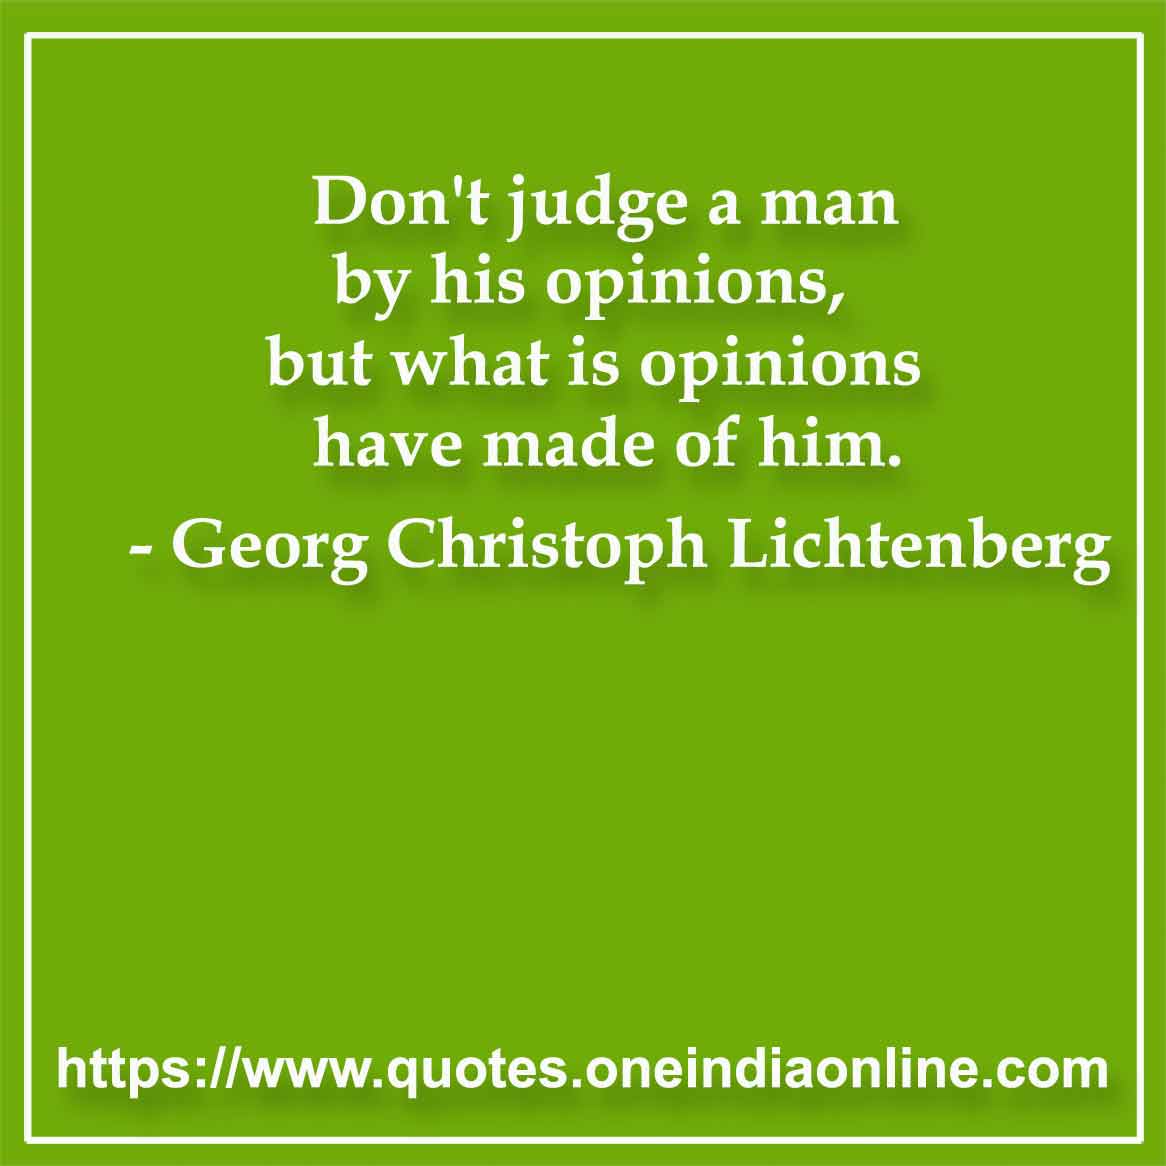 Don't judge a man by his opinions, but what is opinions have made of him. 

- Georg Christoph Lichtenberg Quotes